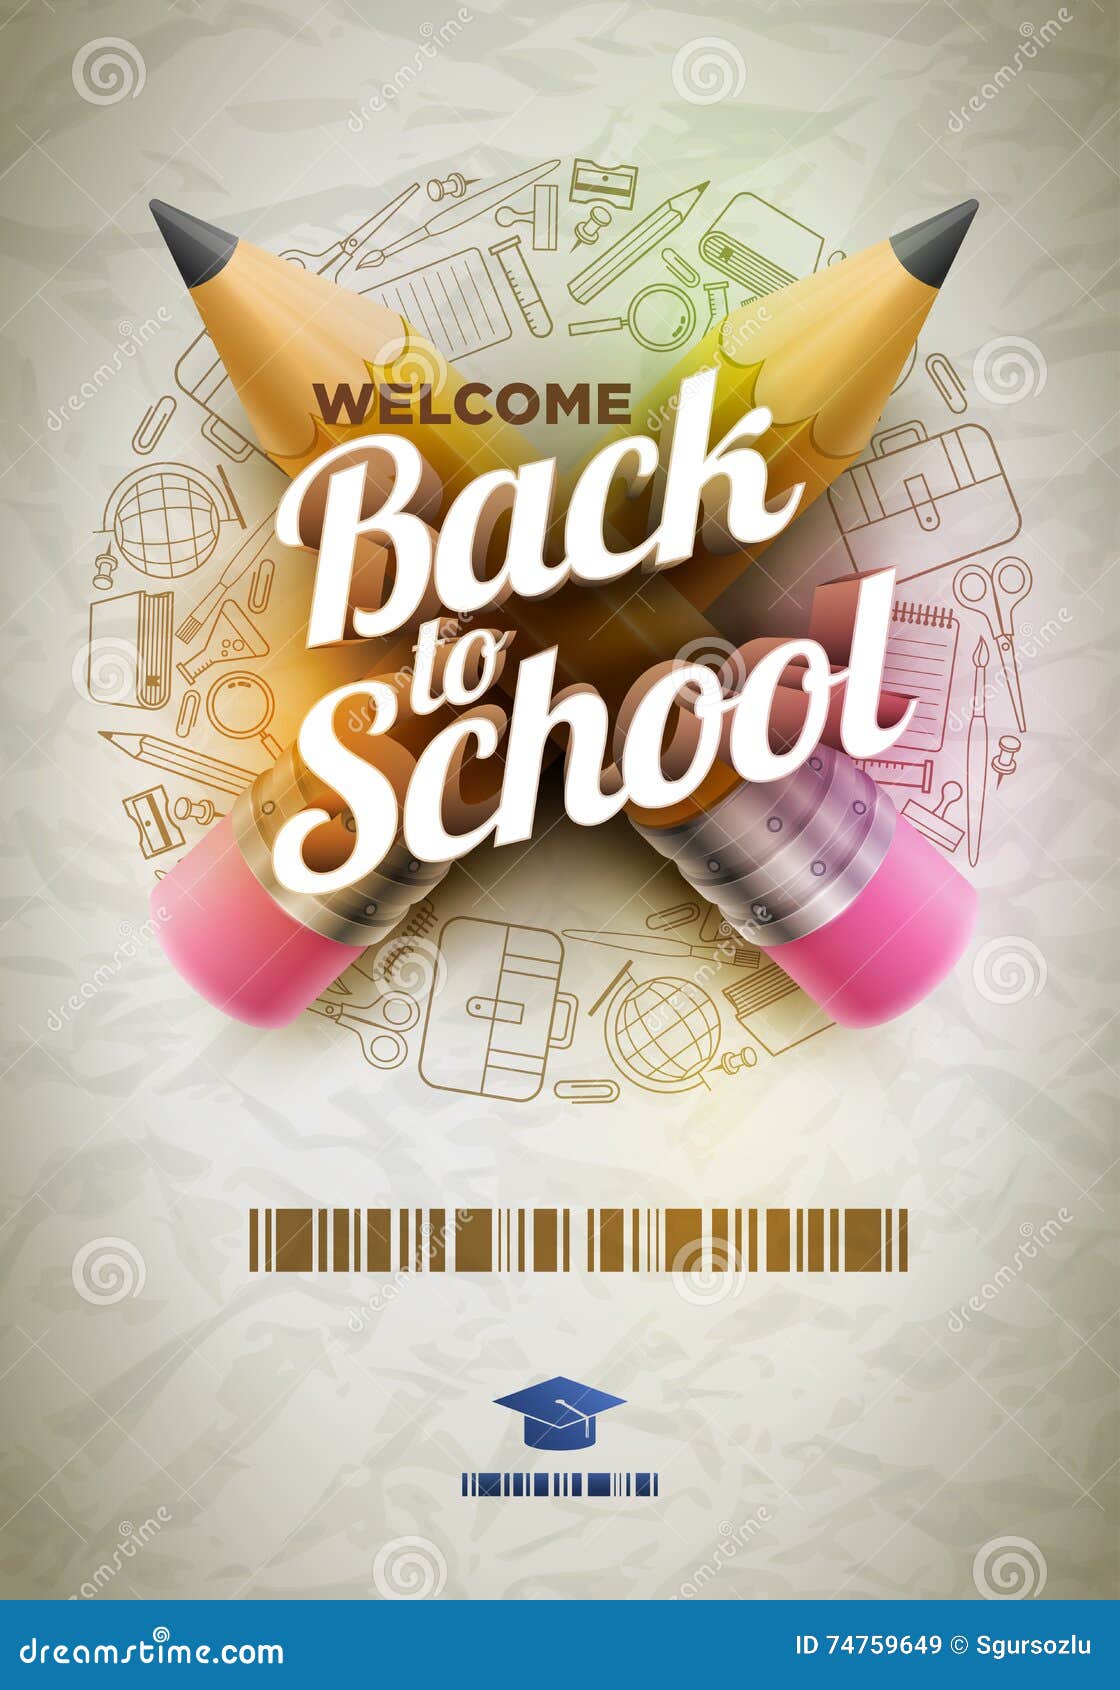 Welcome Back Template from thumbs.dreamstime.com